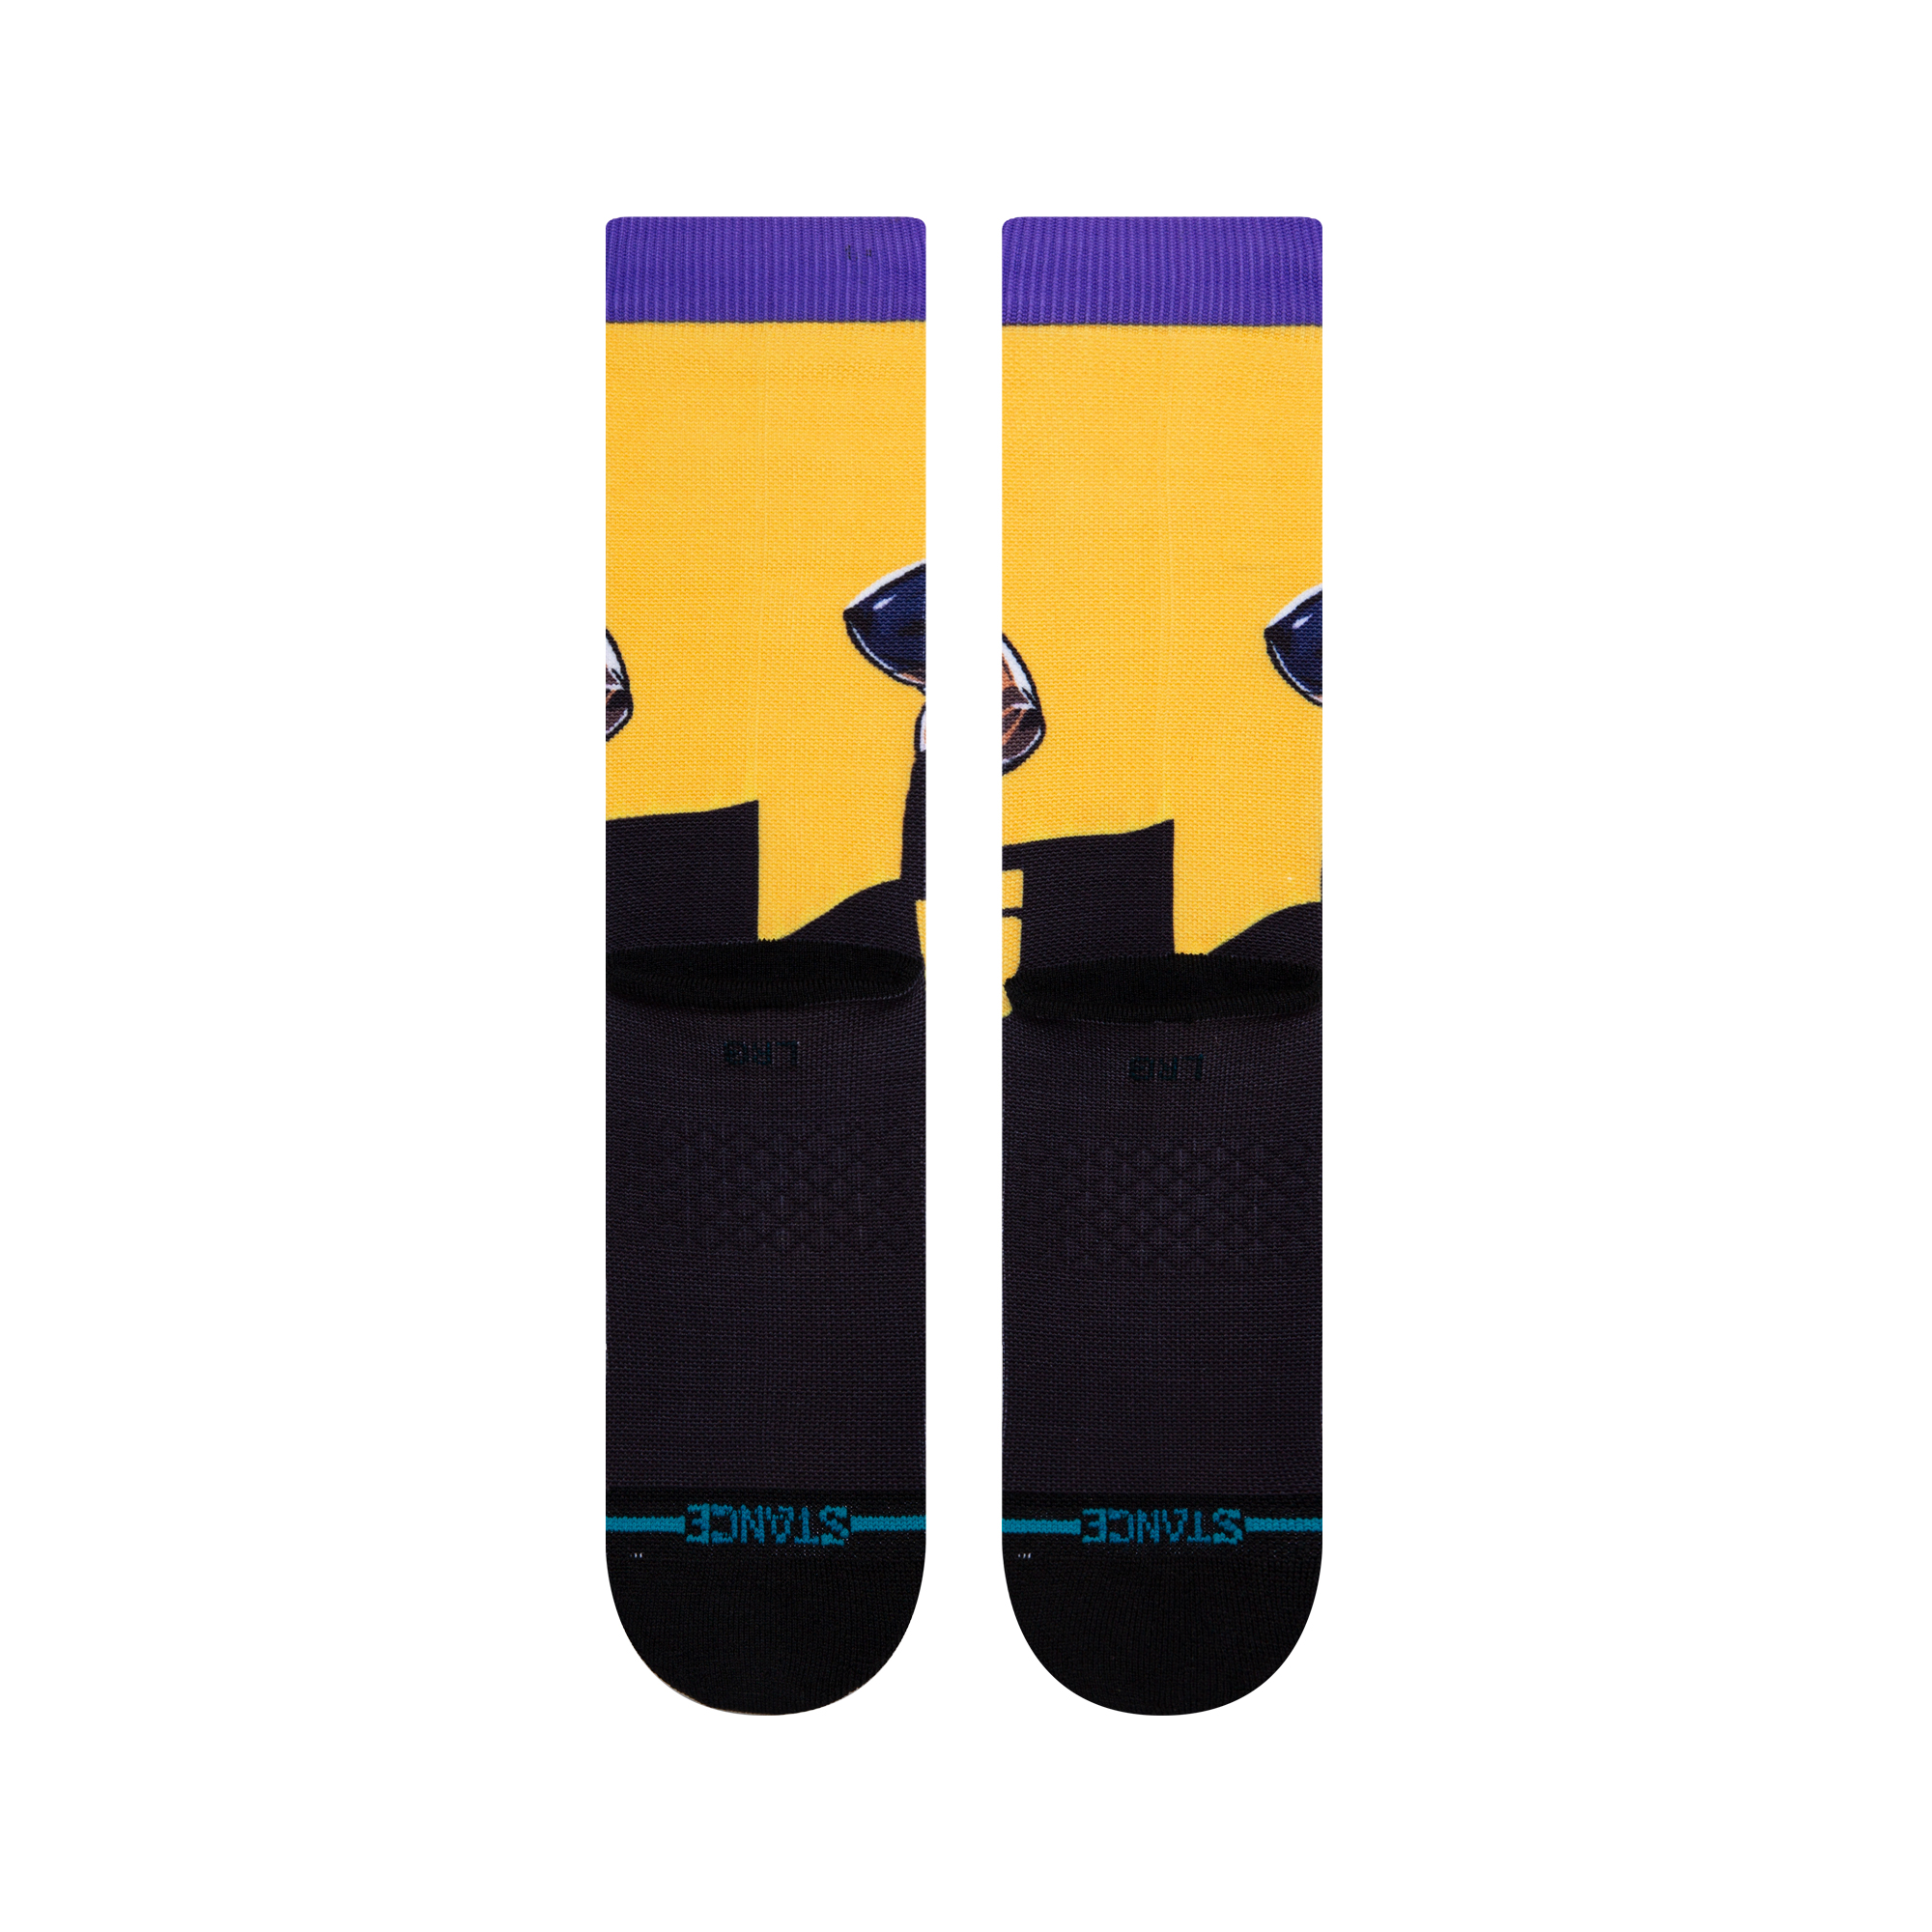 STANCE Lakers ST Crew - Purple - Chaussettes